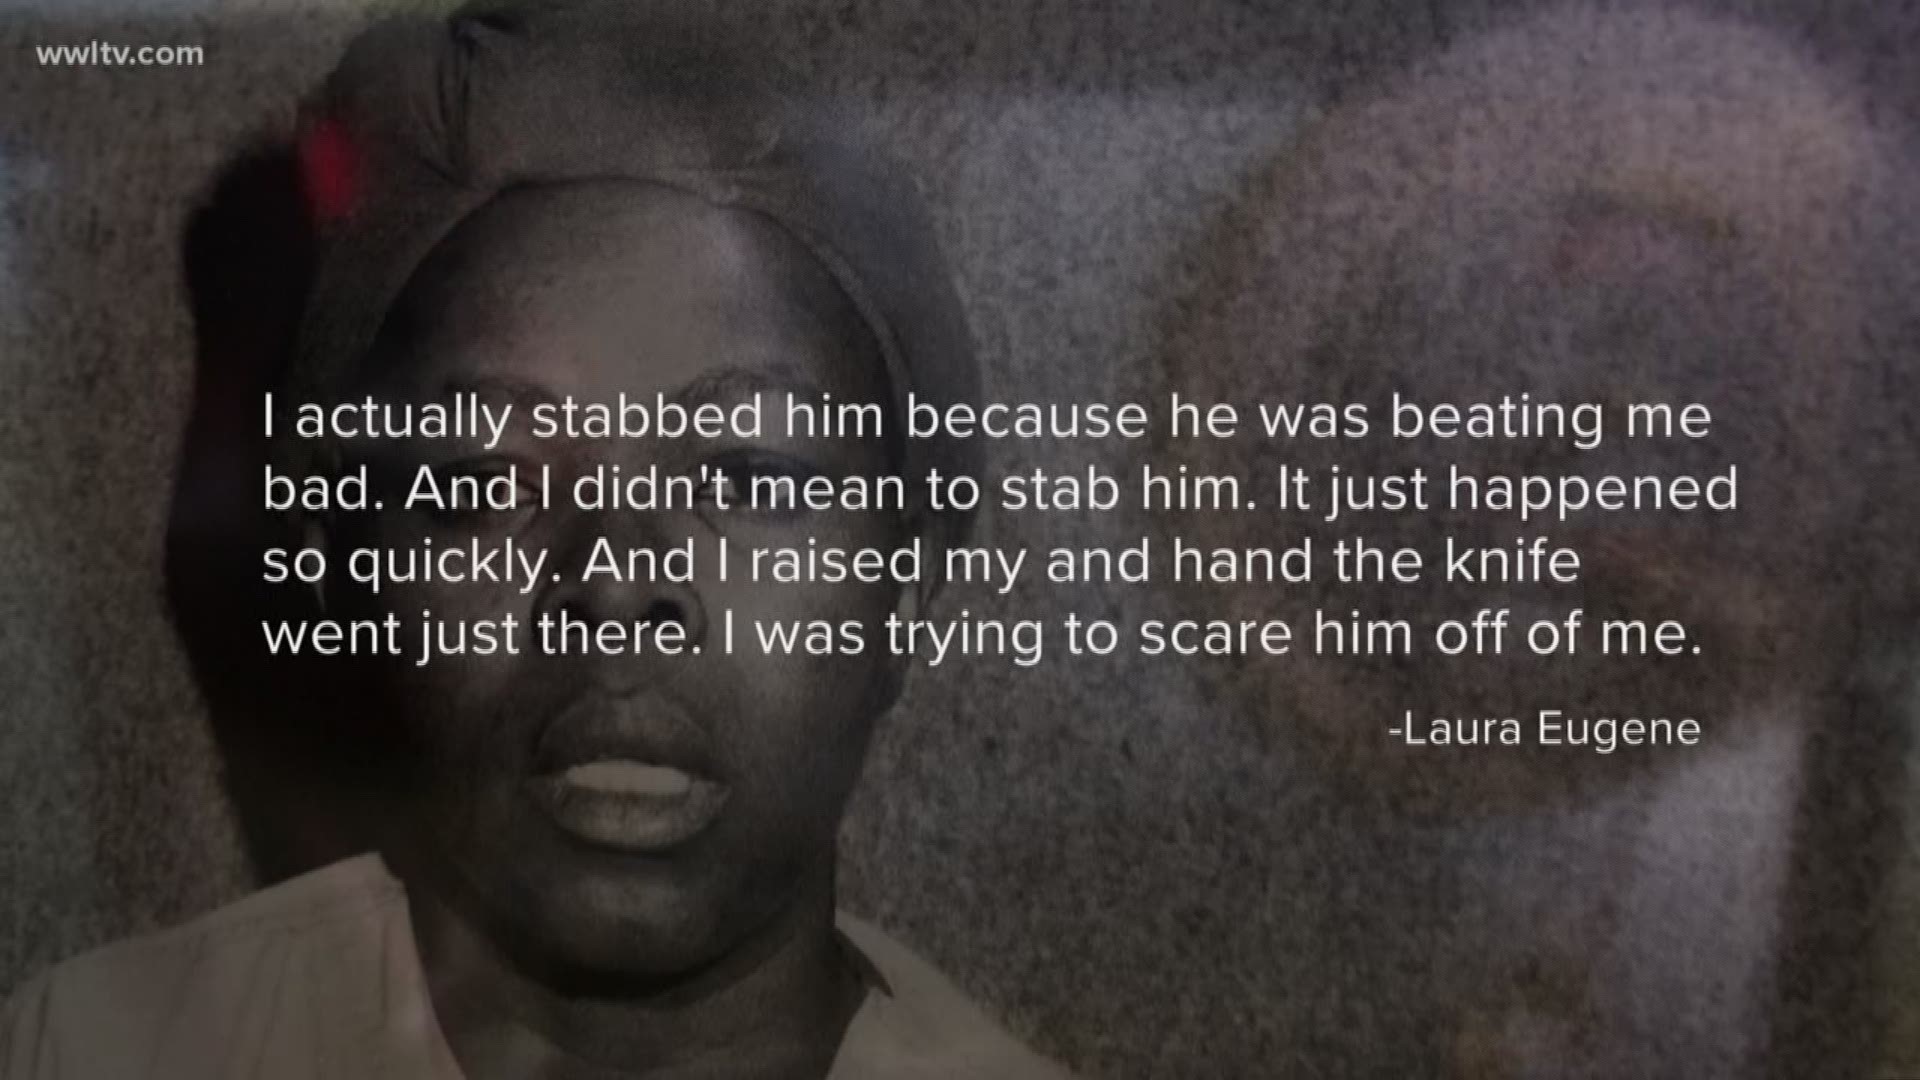 Using court records and media reports, Eyewitness News examined the cases of 139 women serving life sentences in Louisiana prisons. Our analysis found 21 convicted of murder with partners they say regularly left them battered and bruised.